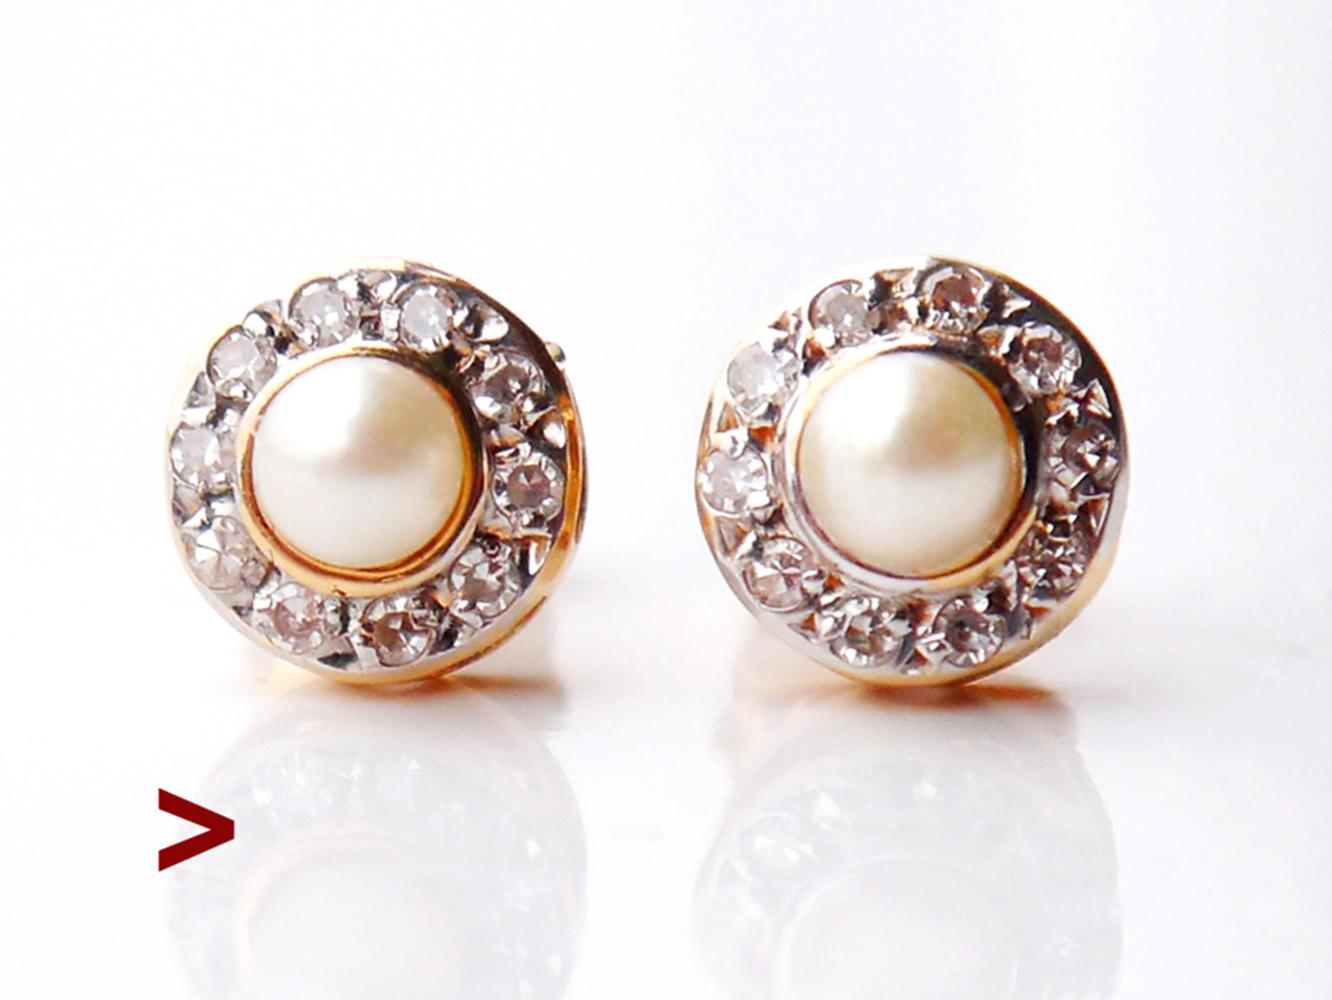 A pair of European Earrings with parts in solid Yellow 18K Gold and Platinum.
Twenty old European diamond cut Diamond stones ca. 0.01 ct each / 0.2ctw. All diamonds with open backs. Color ca. ca. G,H /VS. Pearls Ø 3.2 mm each.

Each floret is Ø 6.5